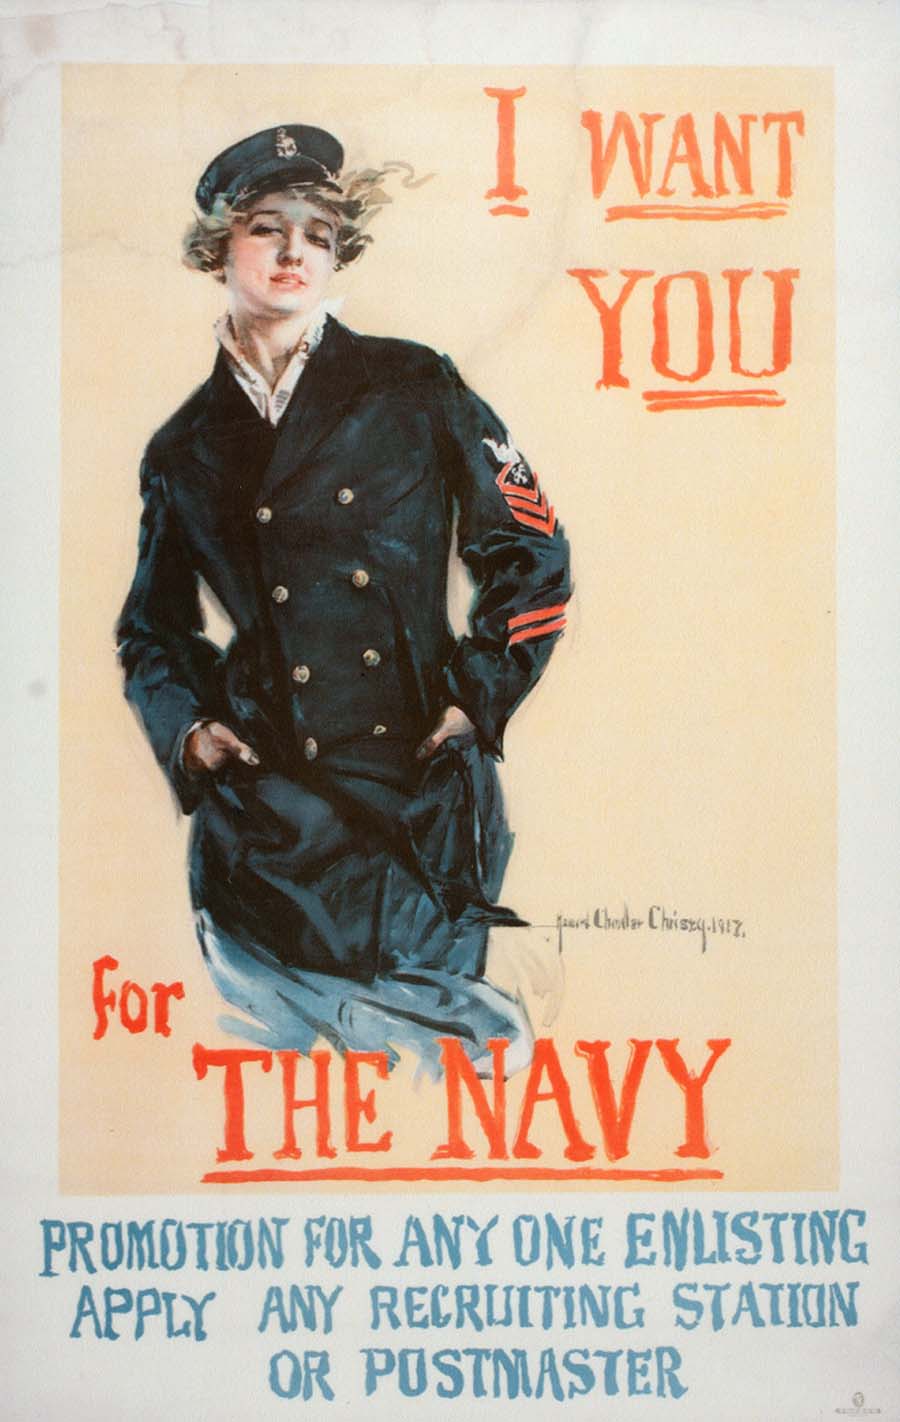 I Want You For The Navy